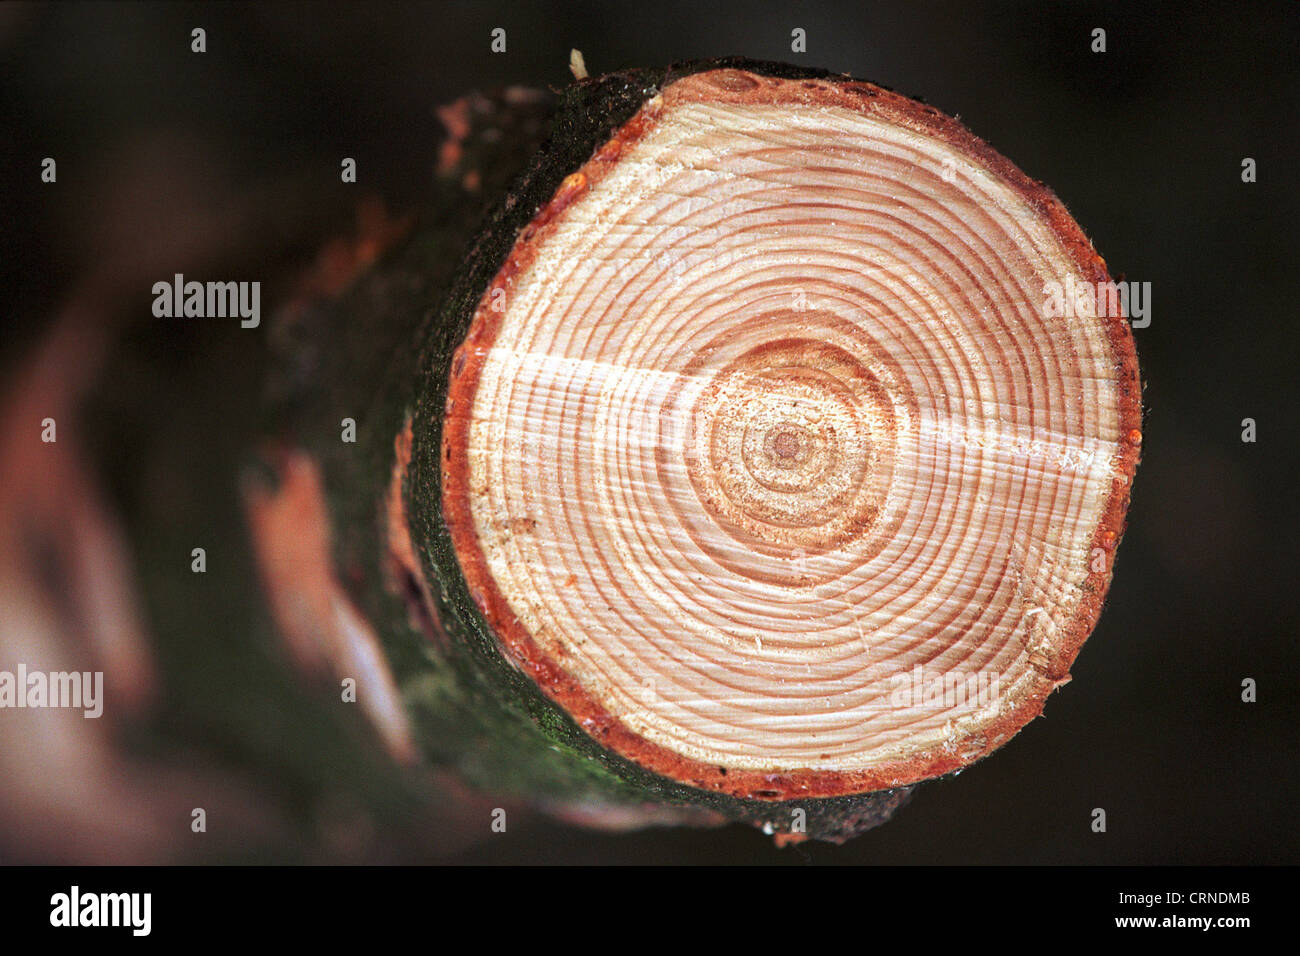 Sawed-off trunk of a tree with annual rings Stock Photo